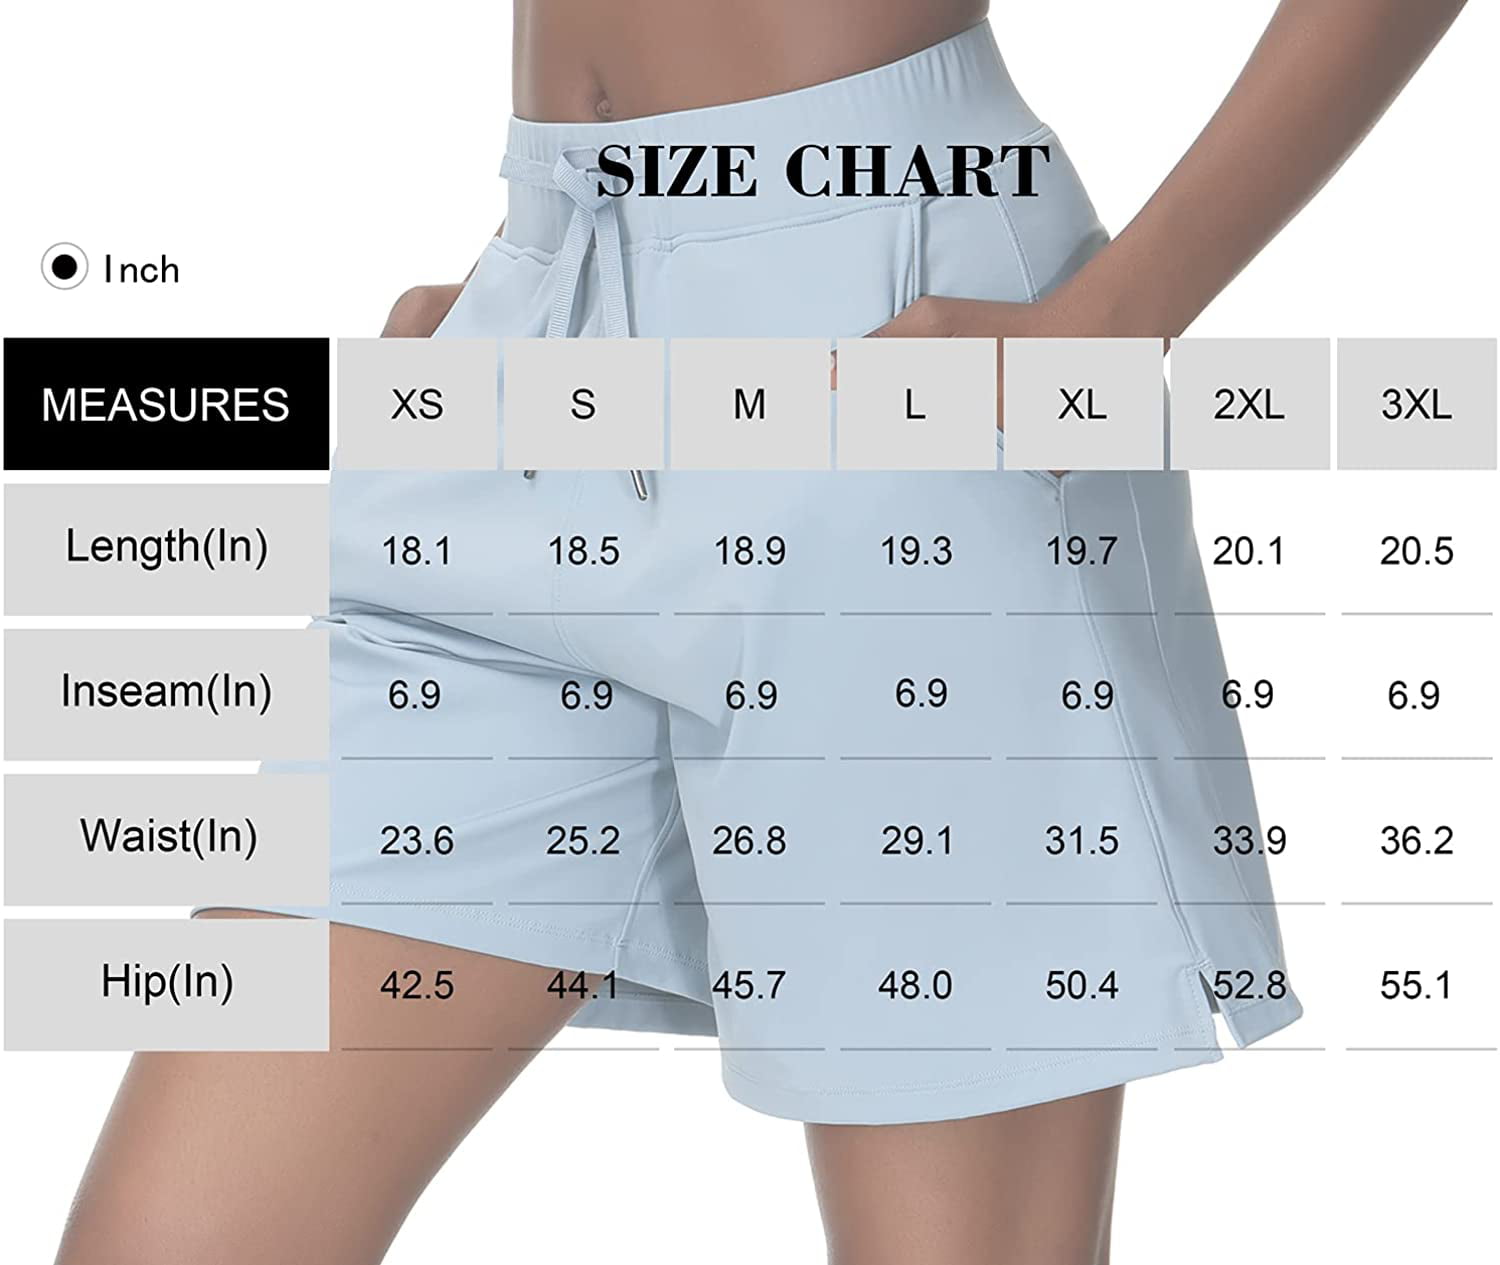 Running Athletic Fautte Women's Workout Yoga Shorts with Big Pockets Bermuda Shorts for Lounge